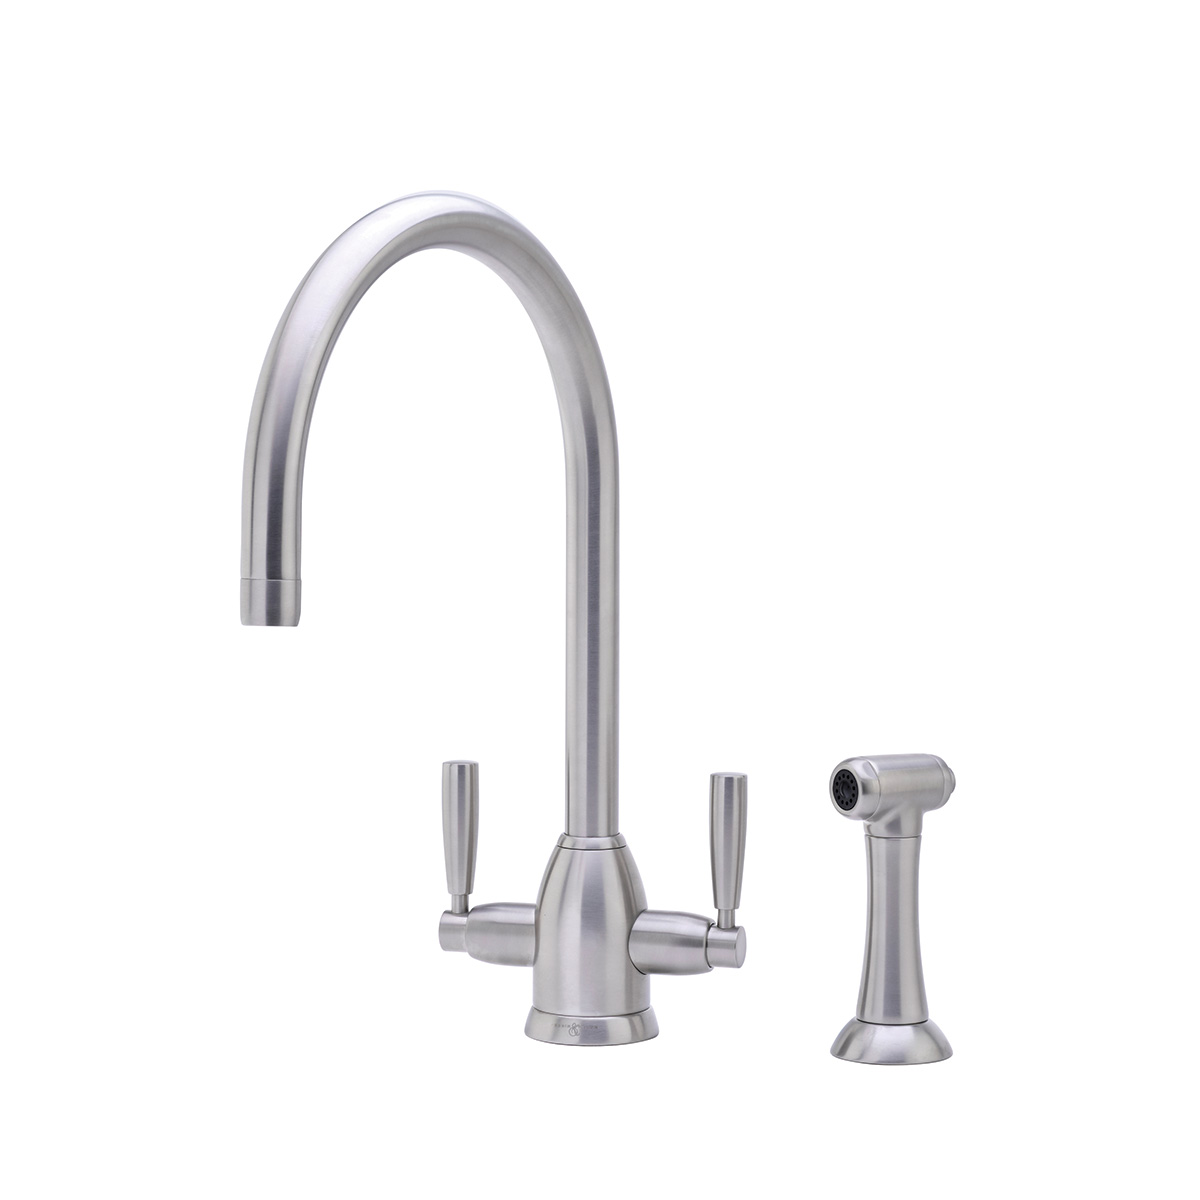 Shaws by Perrin & Rowe Silverdale kitchen mixer with spray rinse in Pewter. Oberon style kitchen mixer AUSH.4866. Distributed in Australia by Luxe by Design, Brisbane.